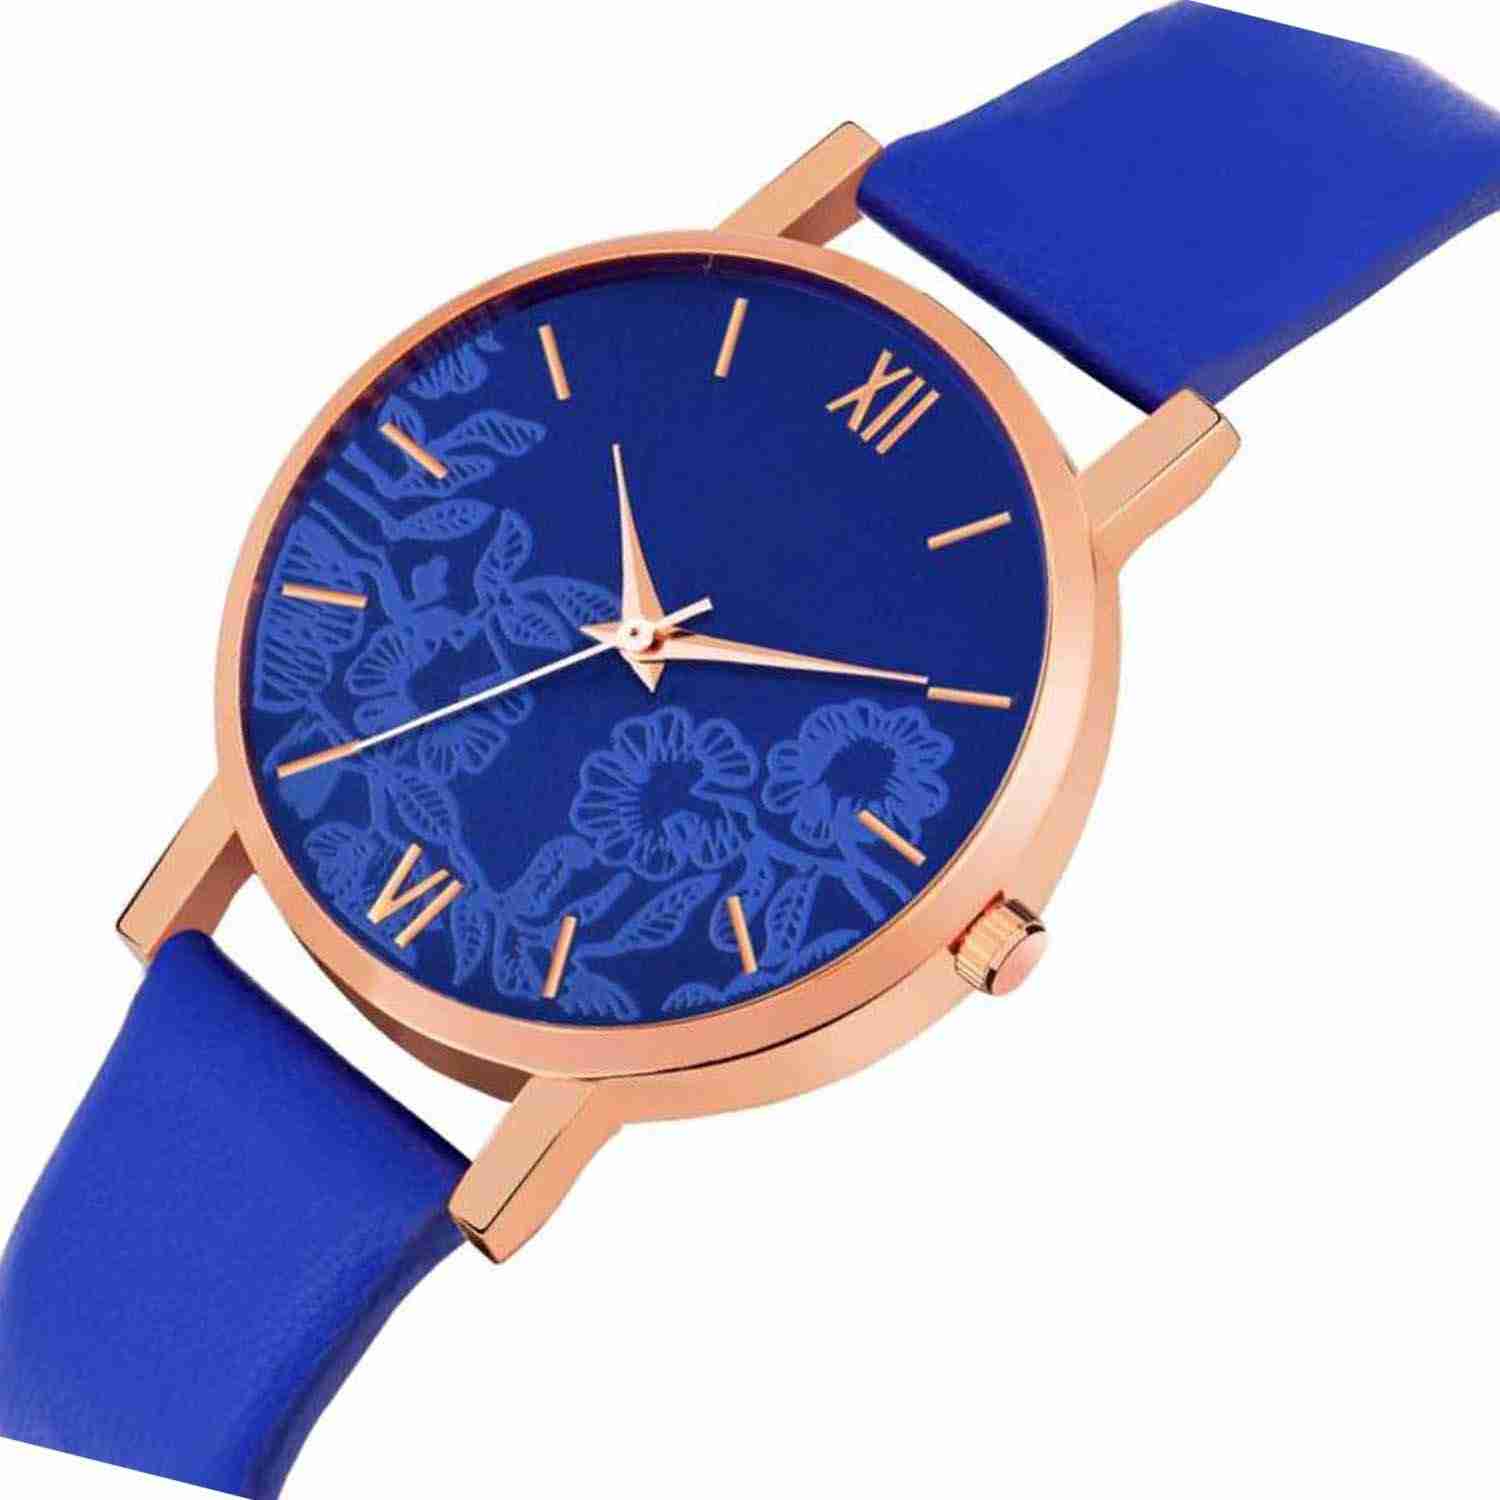 Synthetic Leather Analog Quartz Sports Watch Water Resistant Blue Colour